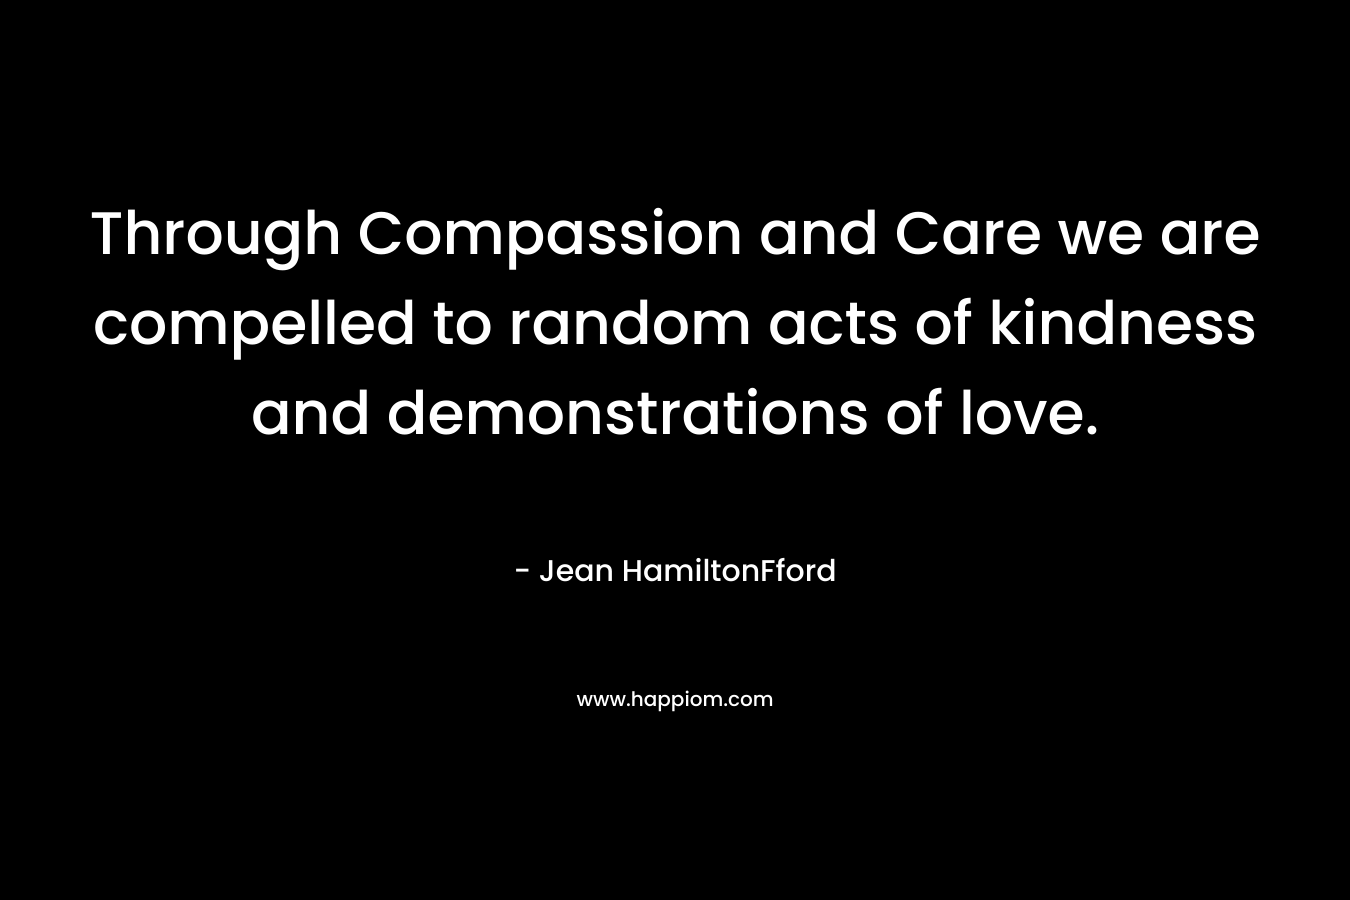 Through Compassion and Care we are compelled to random acts of kindness and demonstrations of love. – Jean HamiltonFford